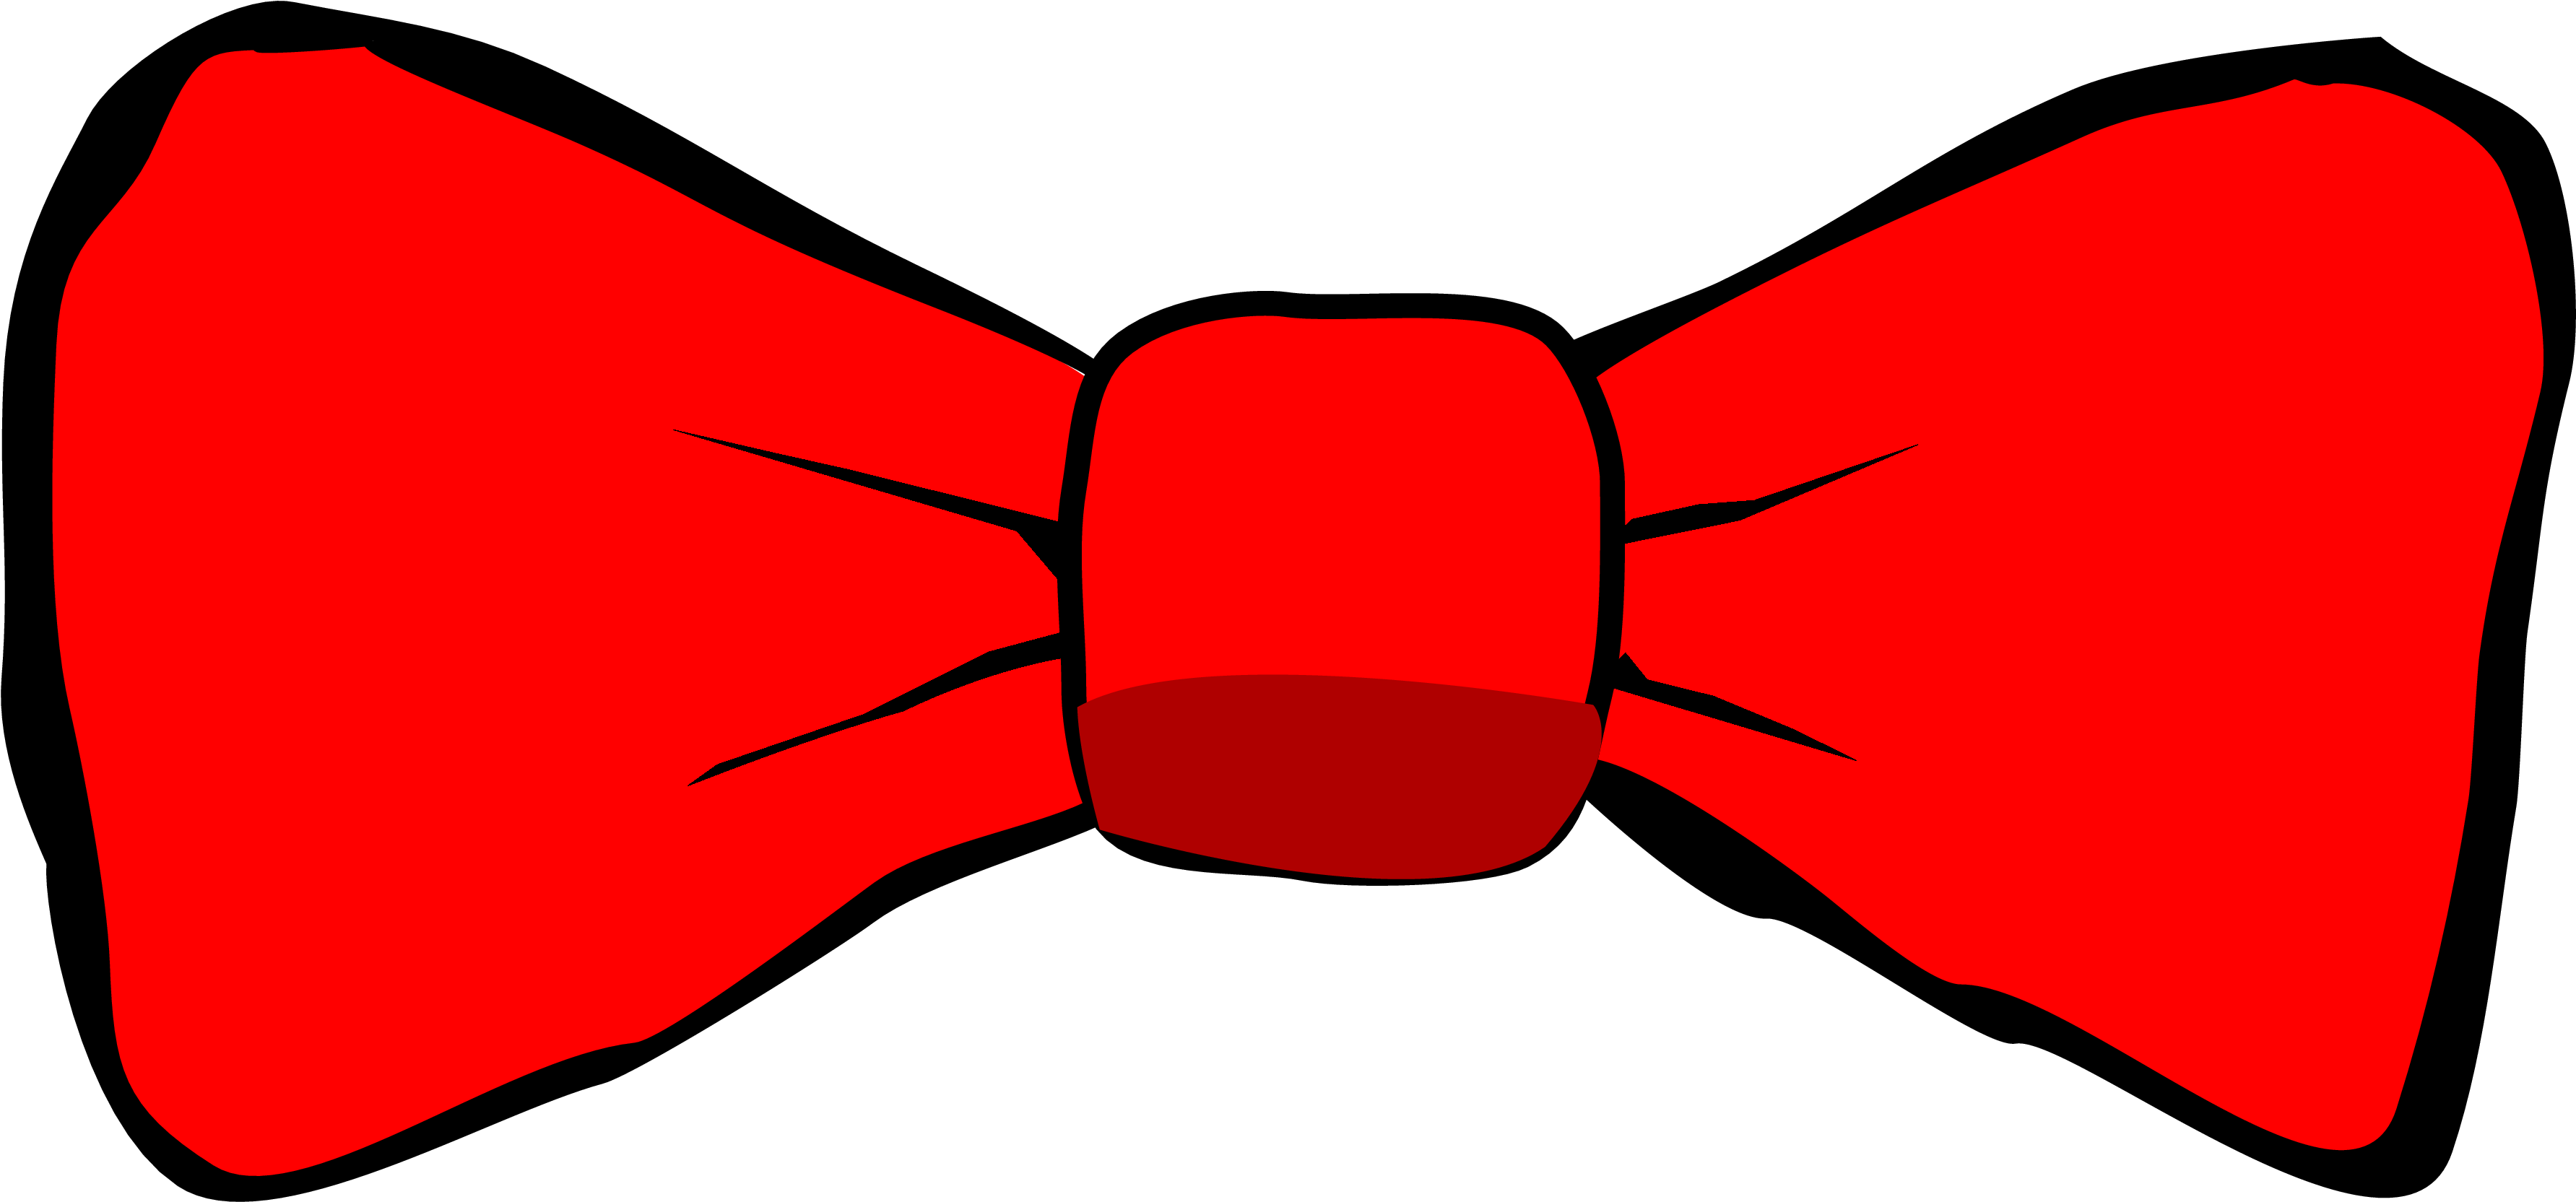 View Larger - Cat In The Hat Bow Tie (3573x1670)